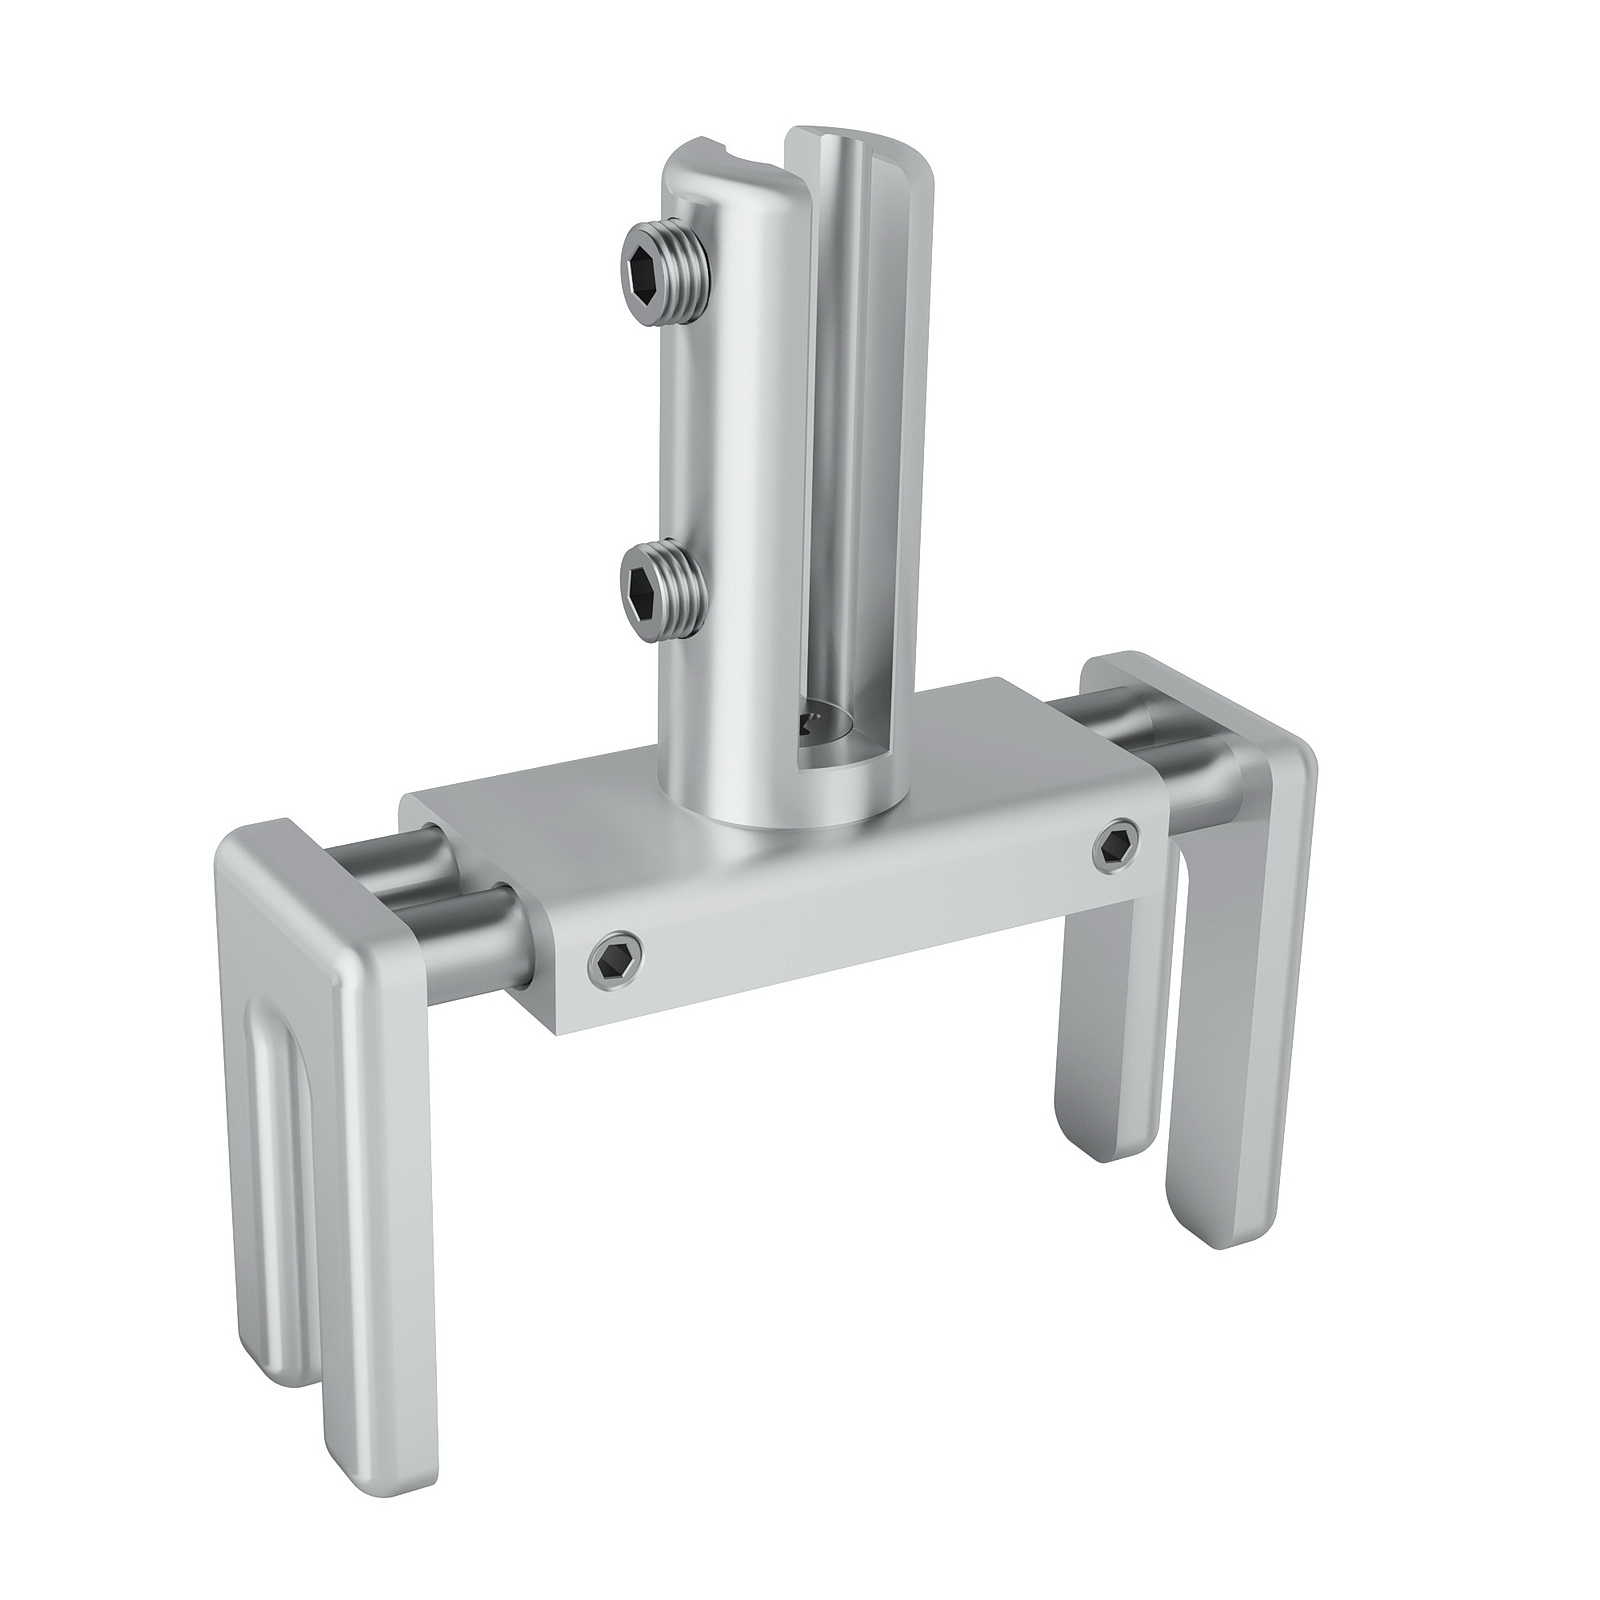 Set of 2, Adjustable Clamp, Aluminum Clear Anodized Finish, to Accommodate 1-3/4'' to 2-3/8'' Cubicle partition. Upt to 1/4'' material accepted on the fork